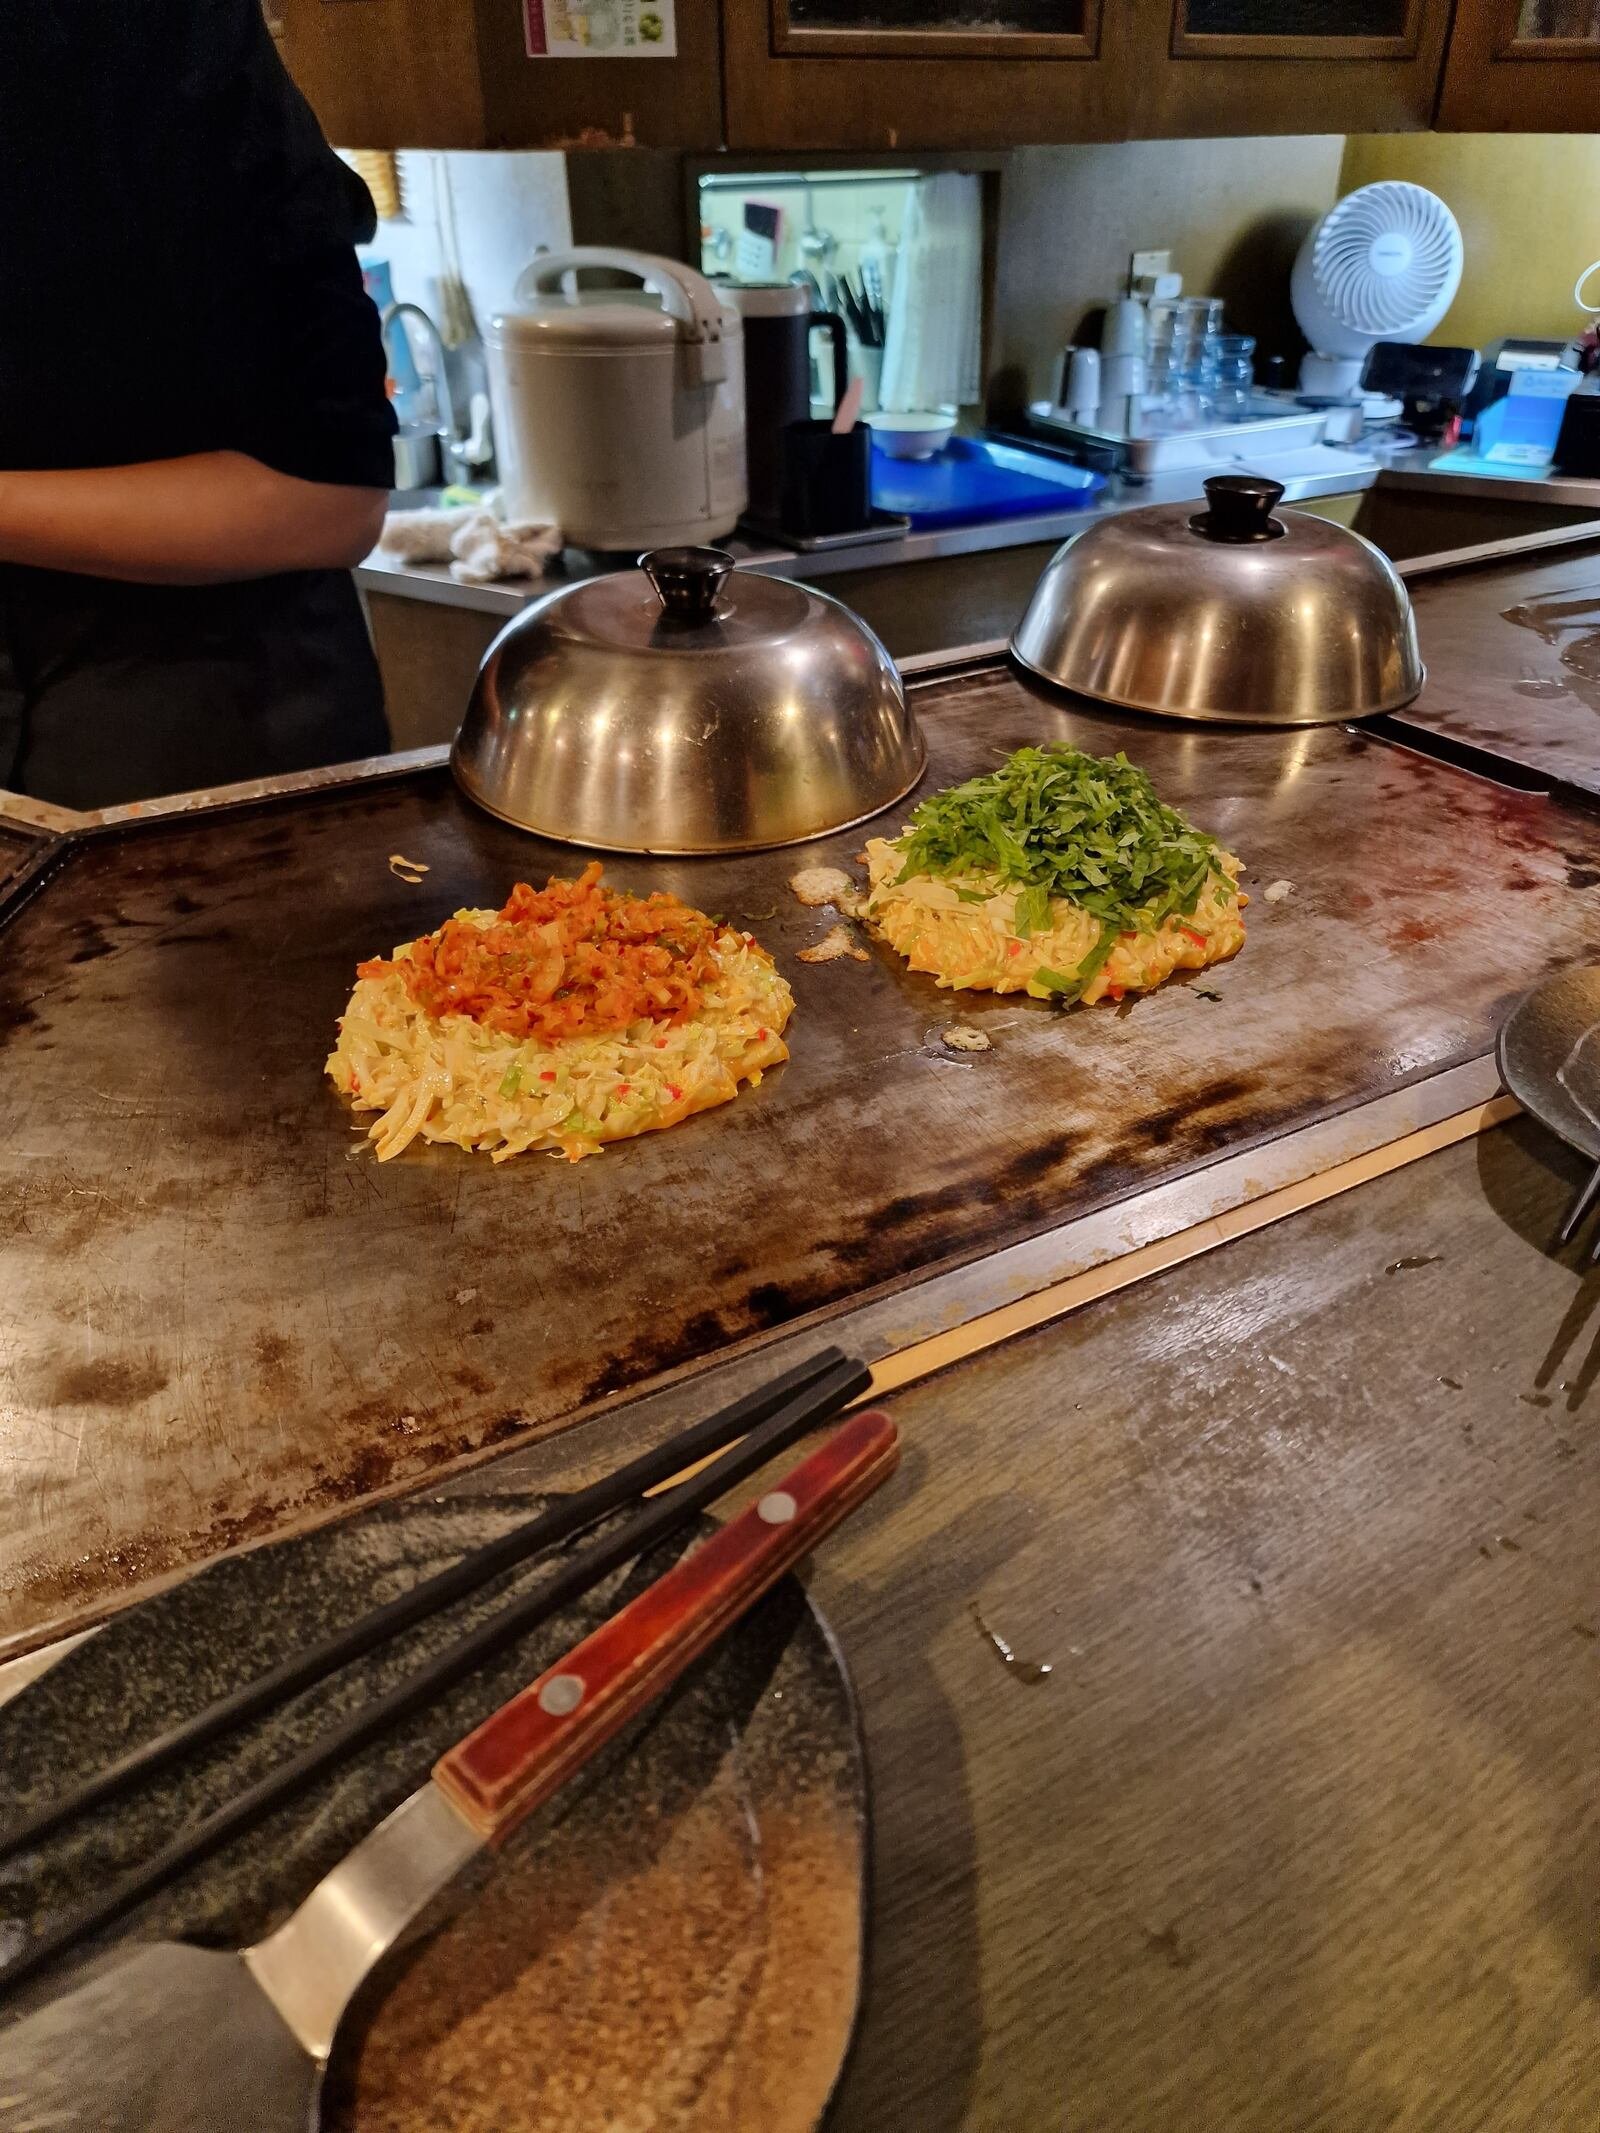 two savory pancakes one with a red topping and one with a green topping cooking on a hot plate in a restaurant